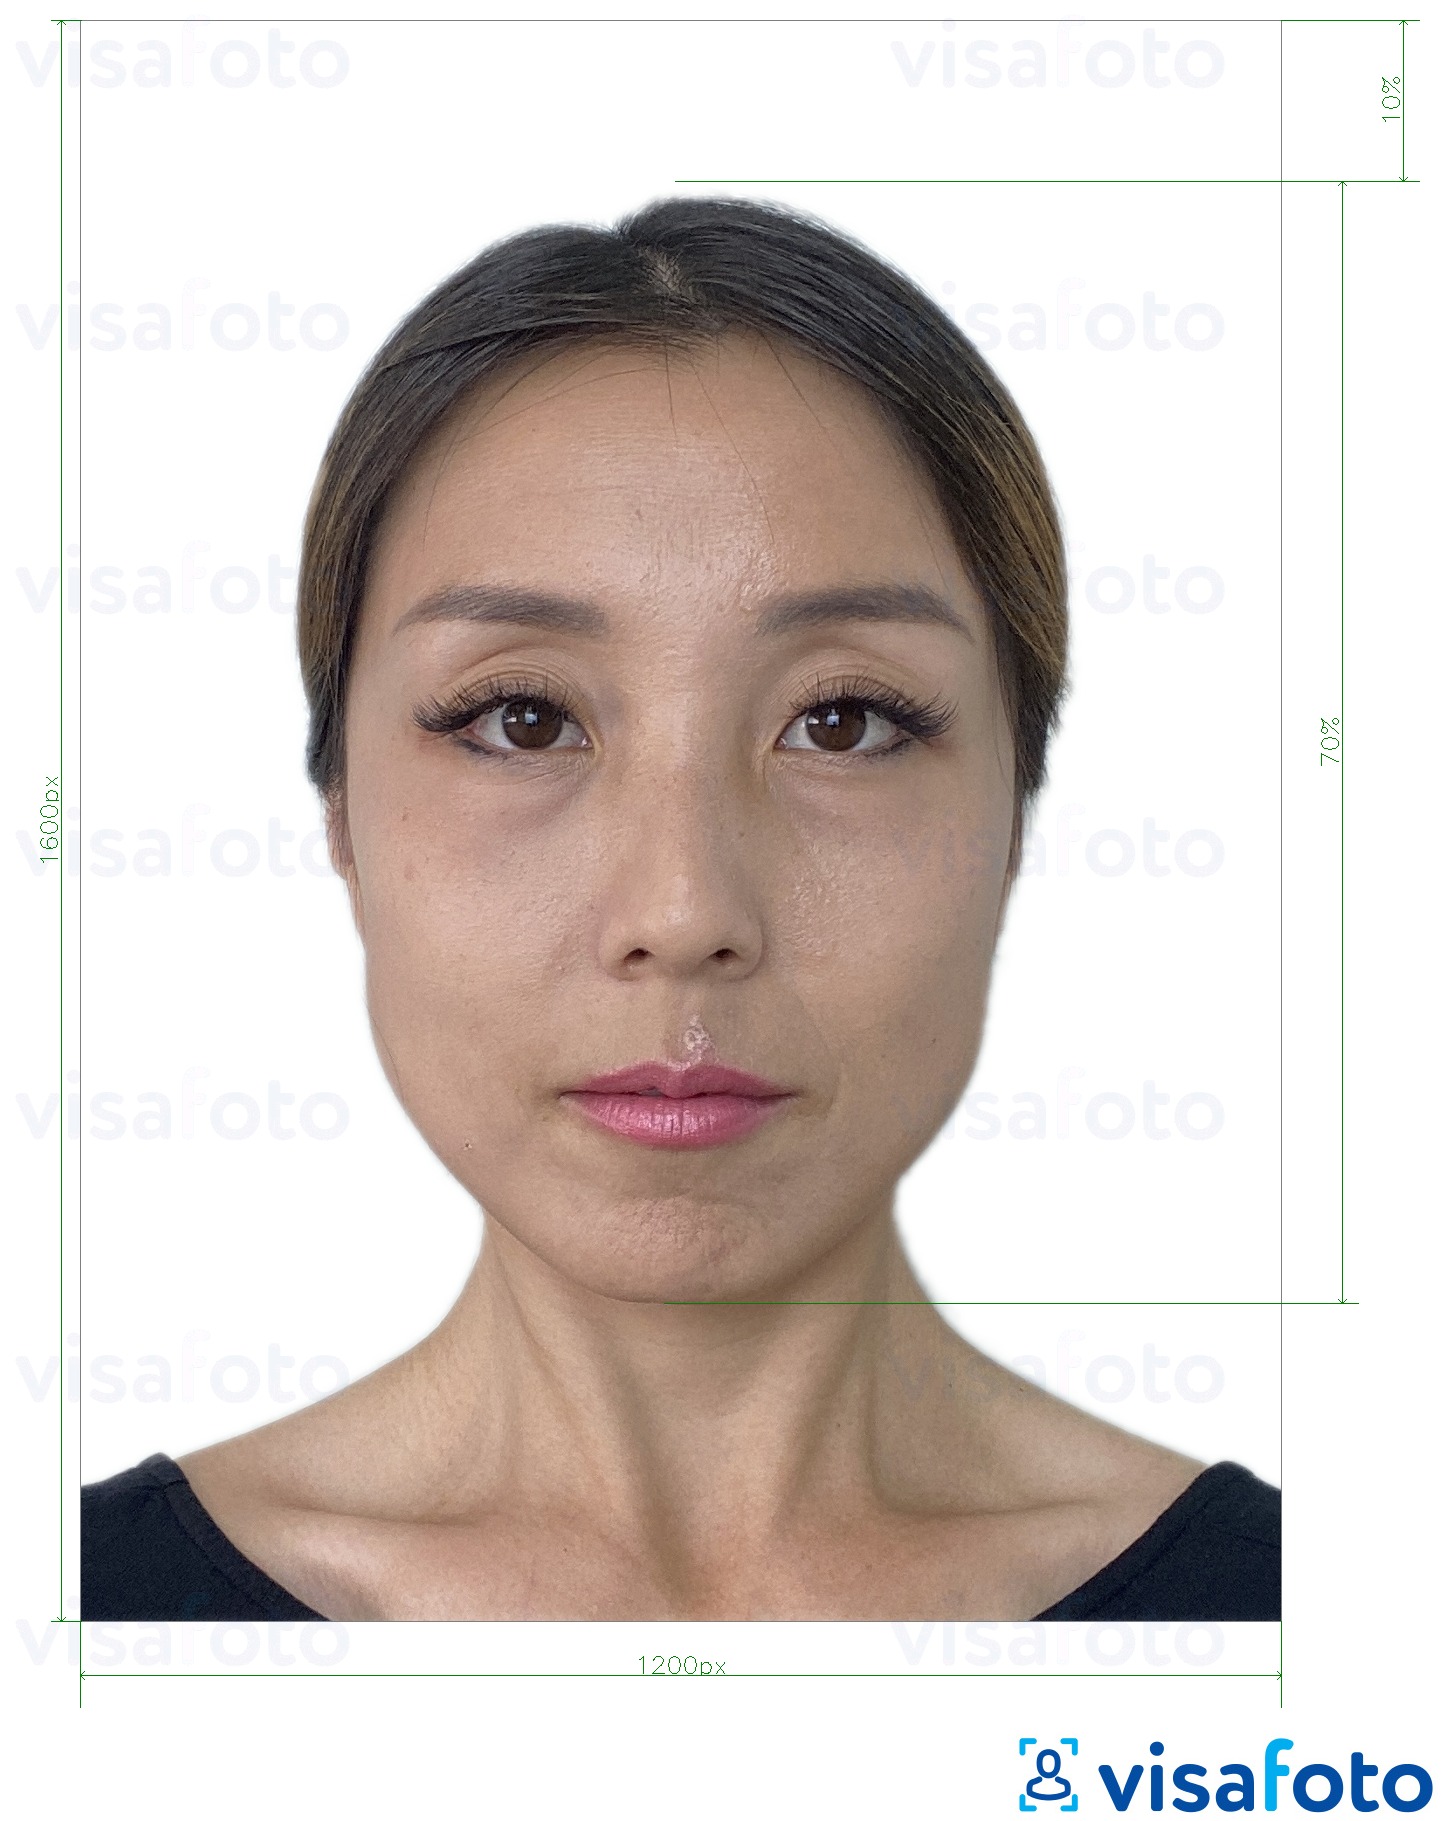 Example of photo for Hong Kong online e-passport 1200x1600 pixels with exact size specification